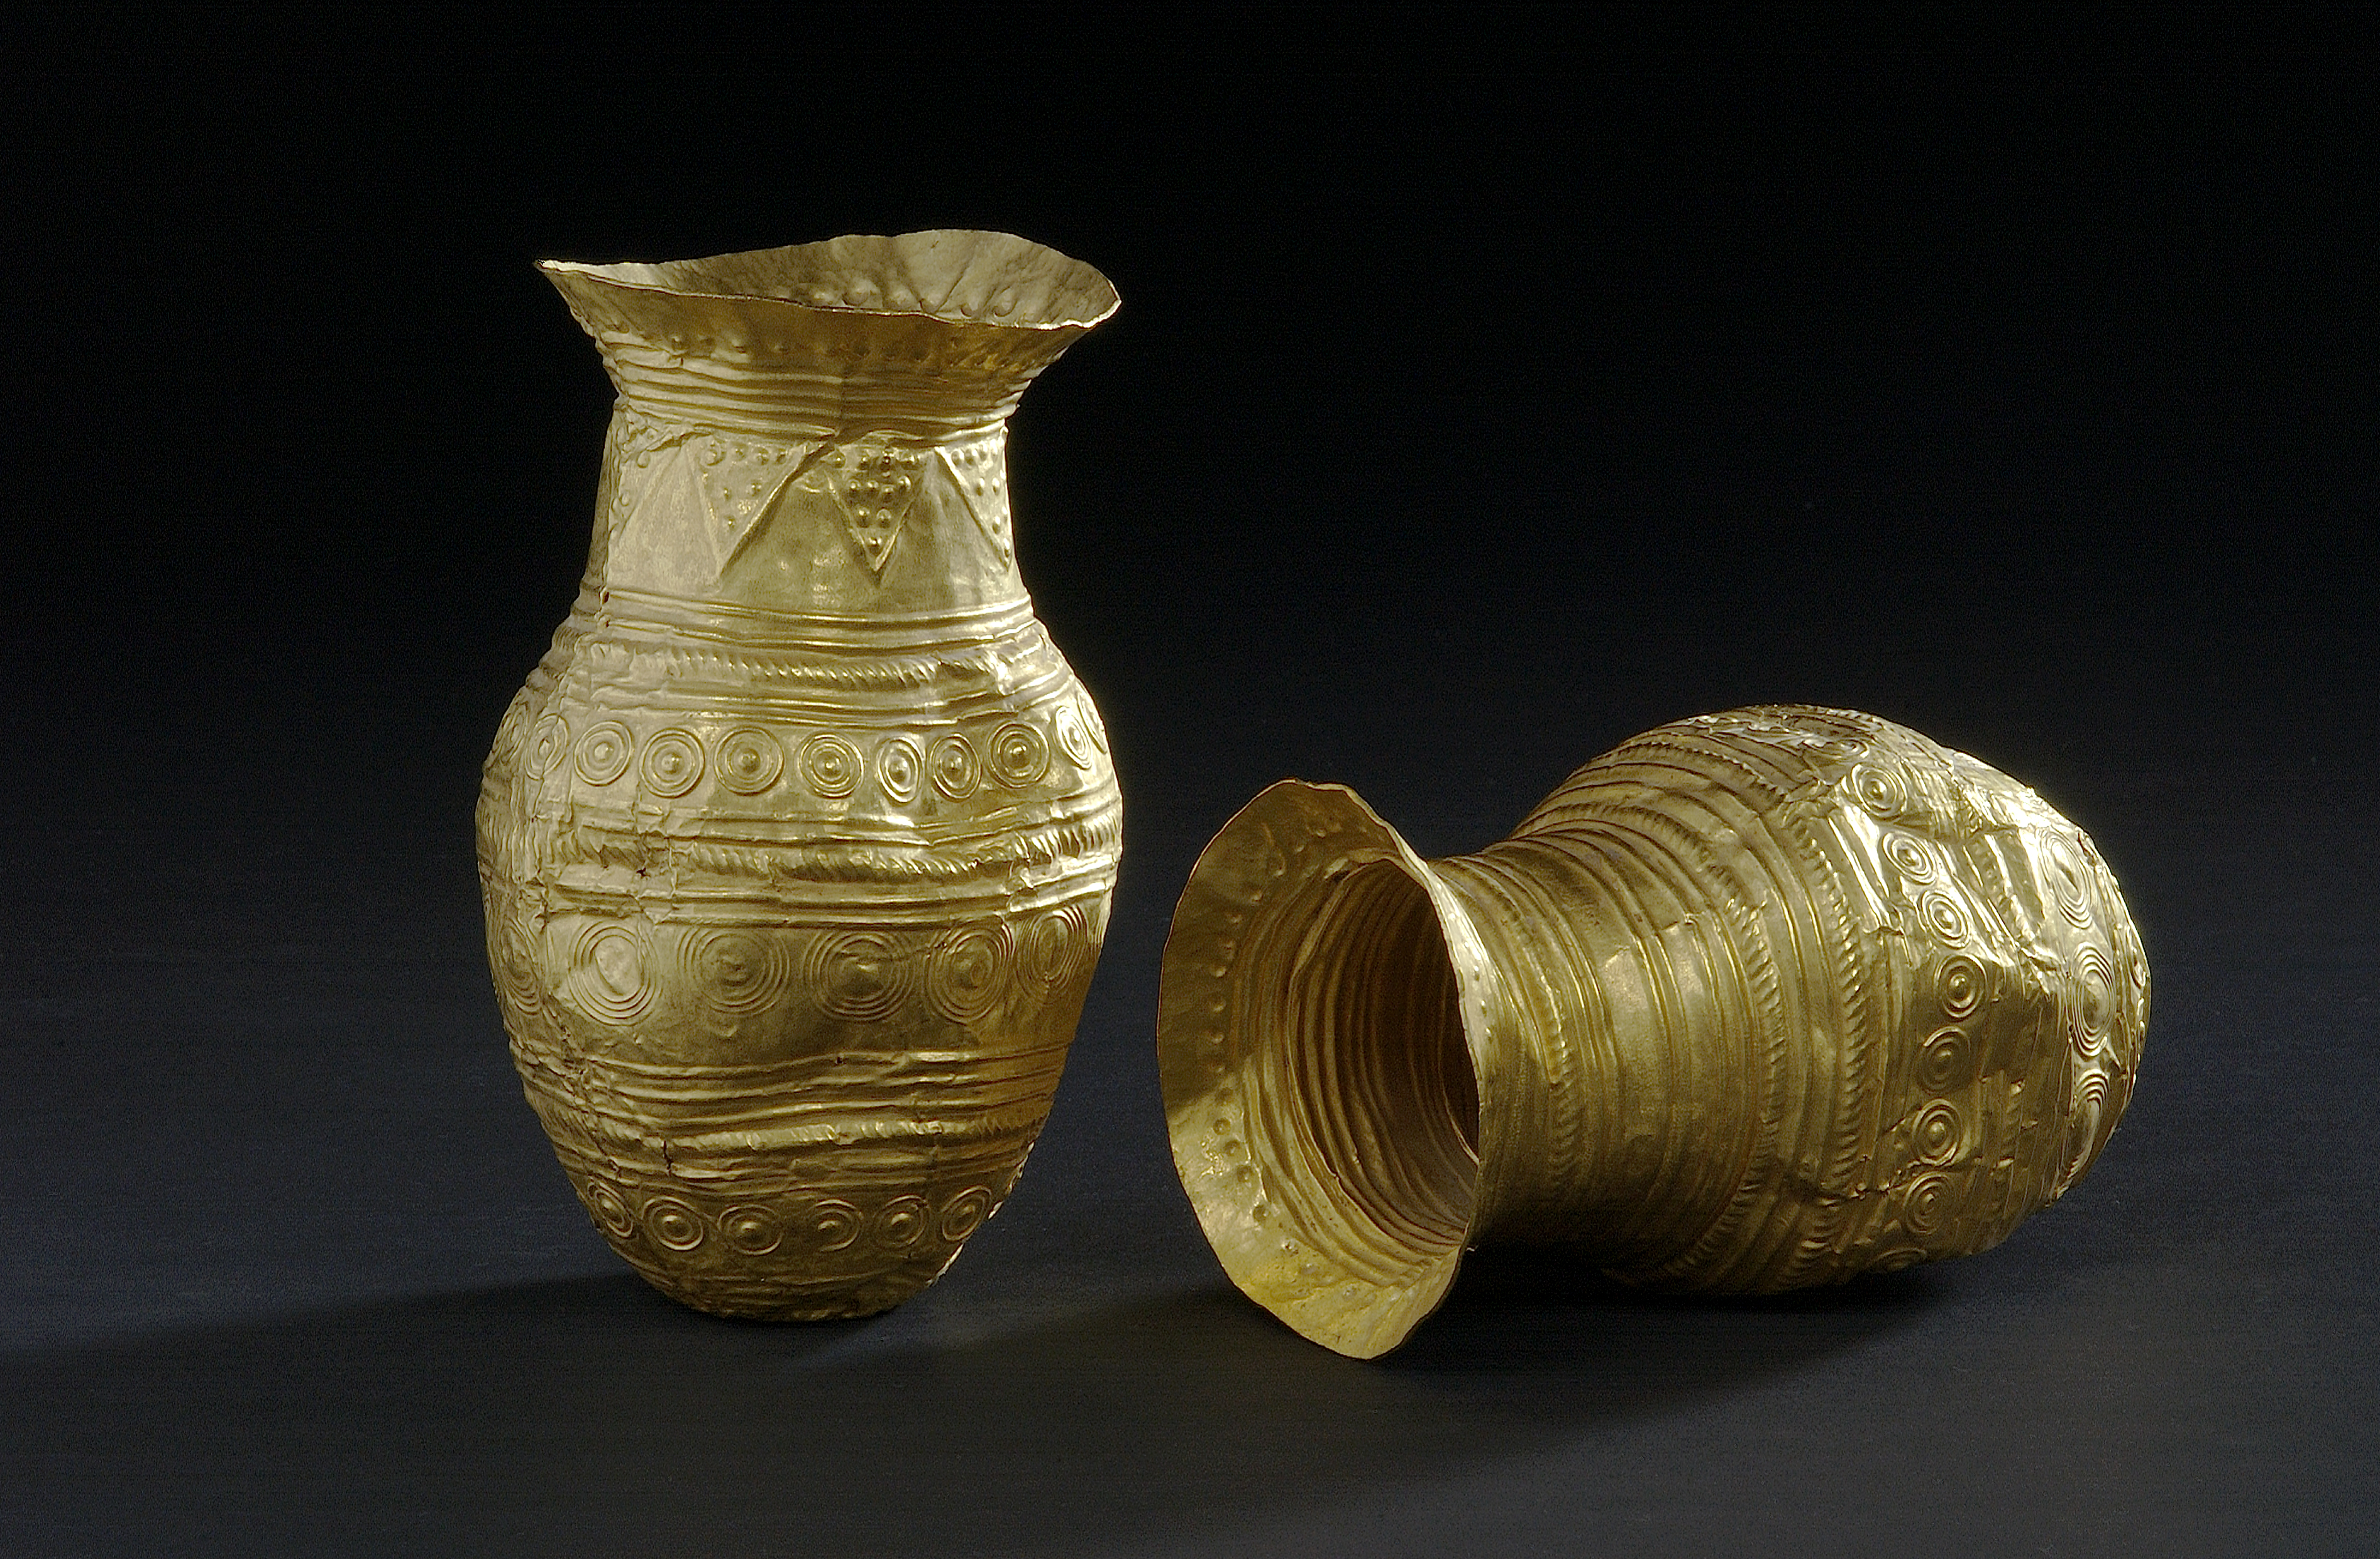 Gold Vessels and Jewellery